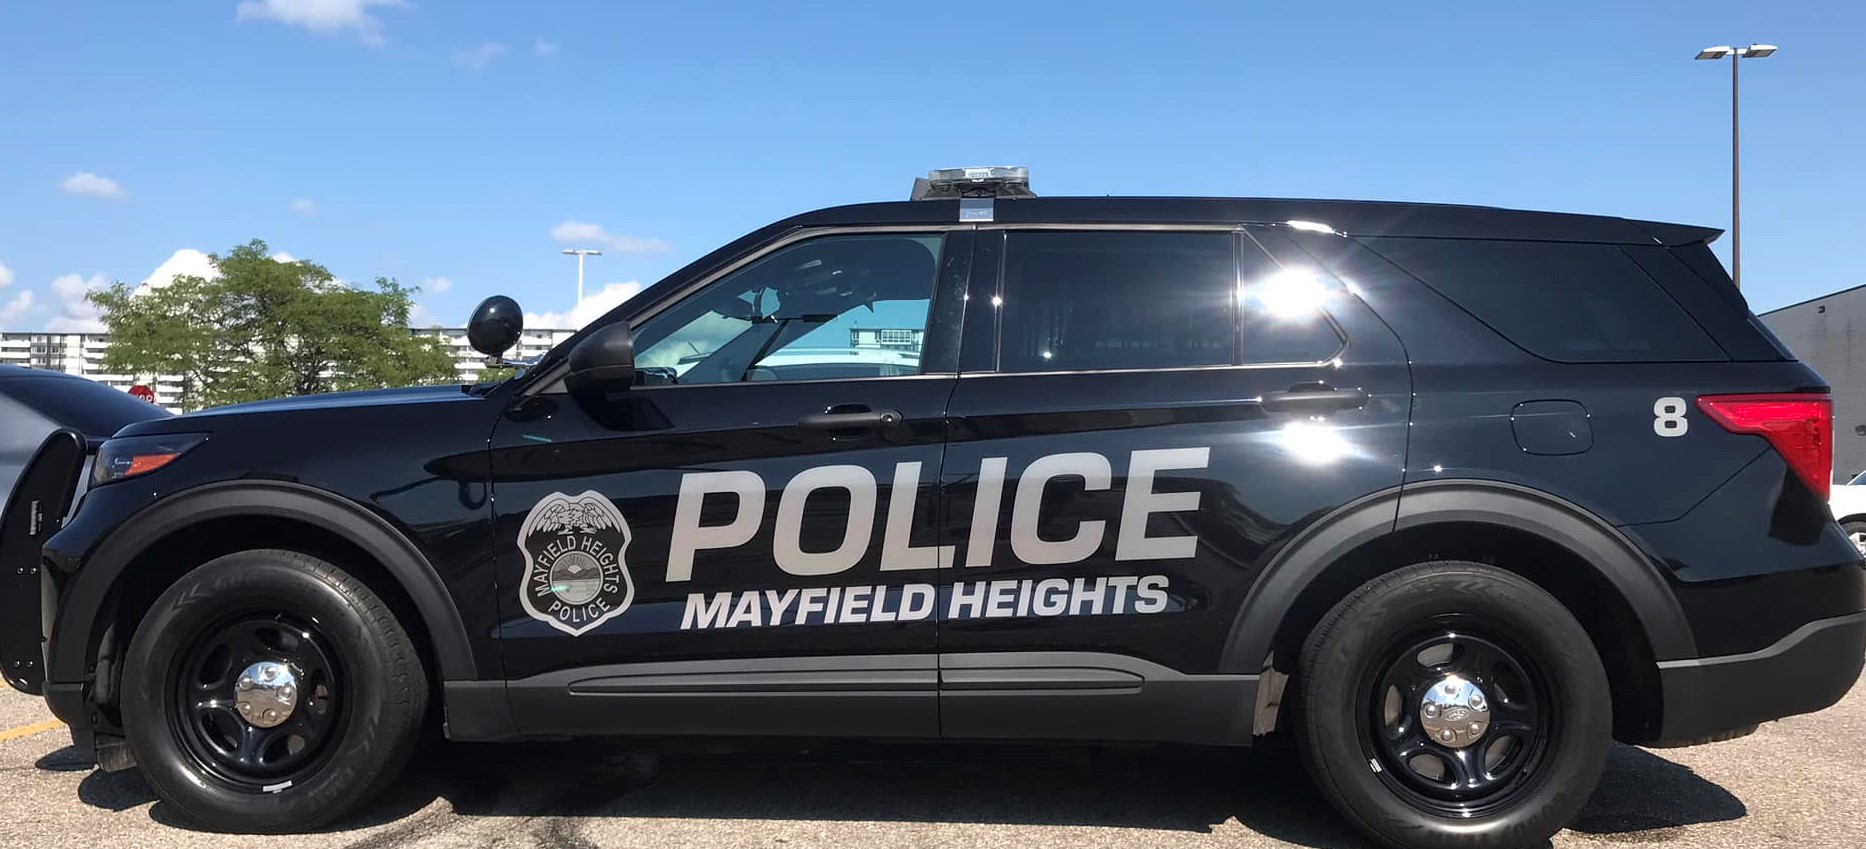 Woman passing counterfeit bills may be victim of sex trafficking Mayfield Heights Police Blotter photo